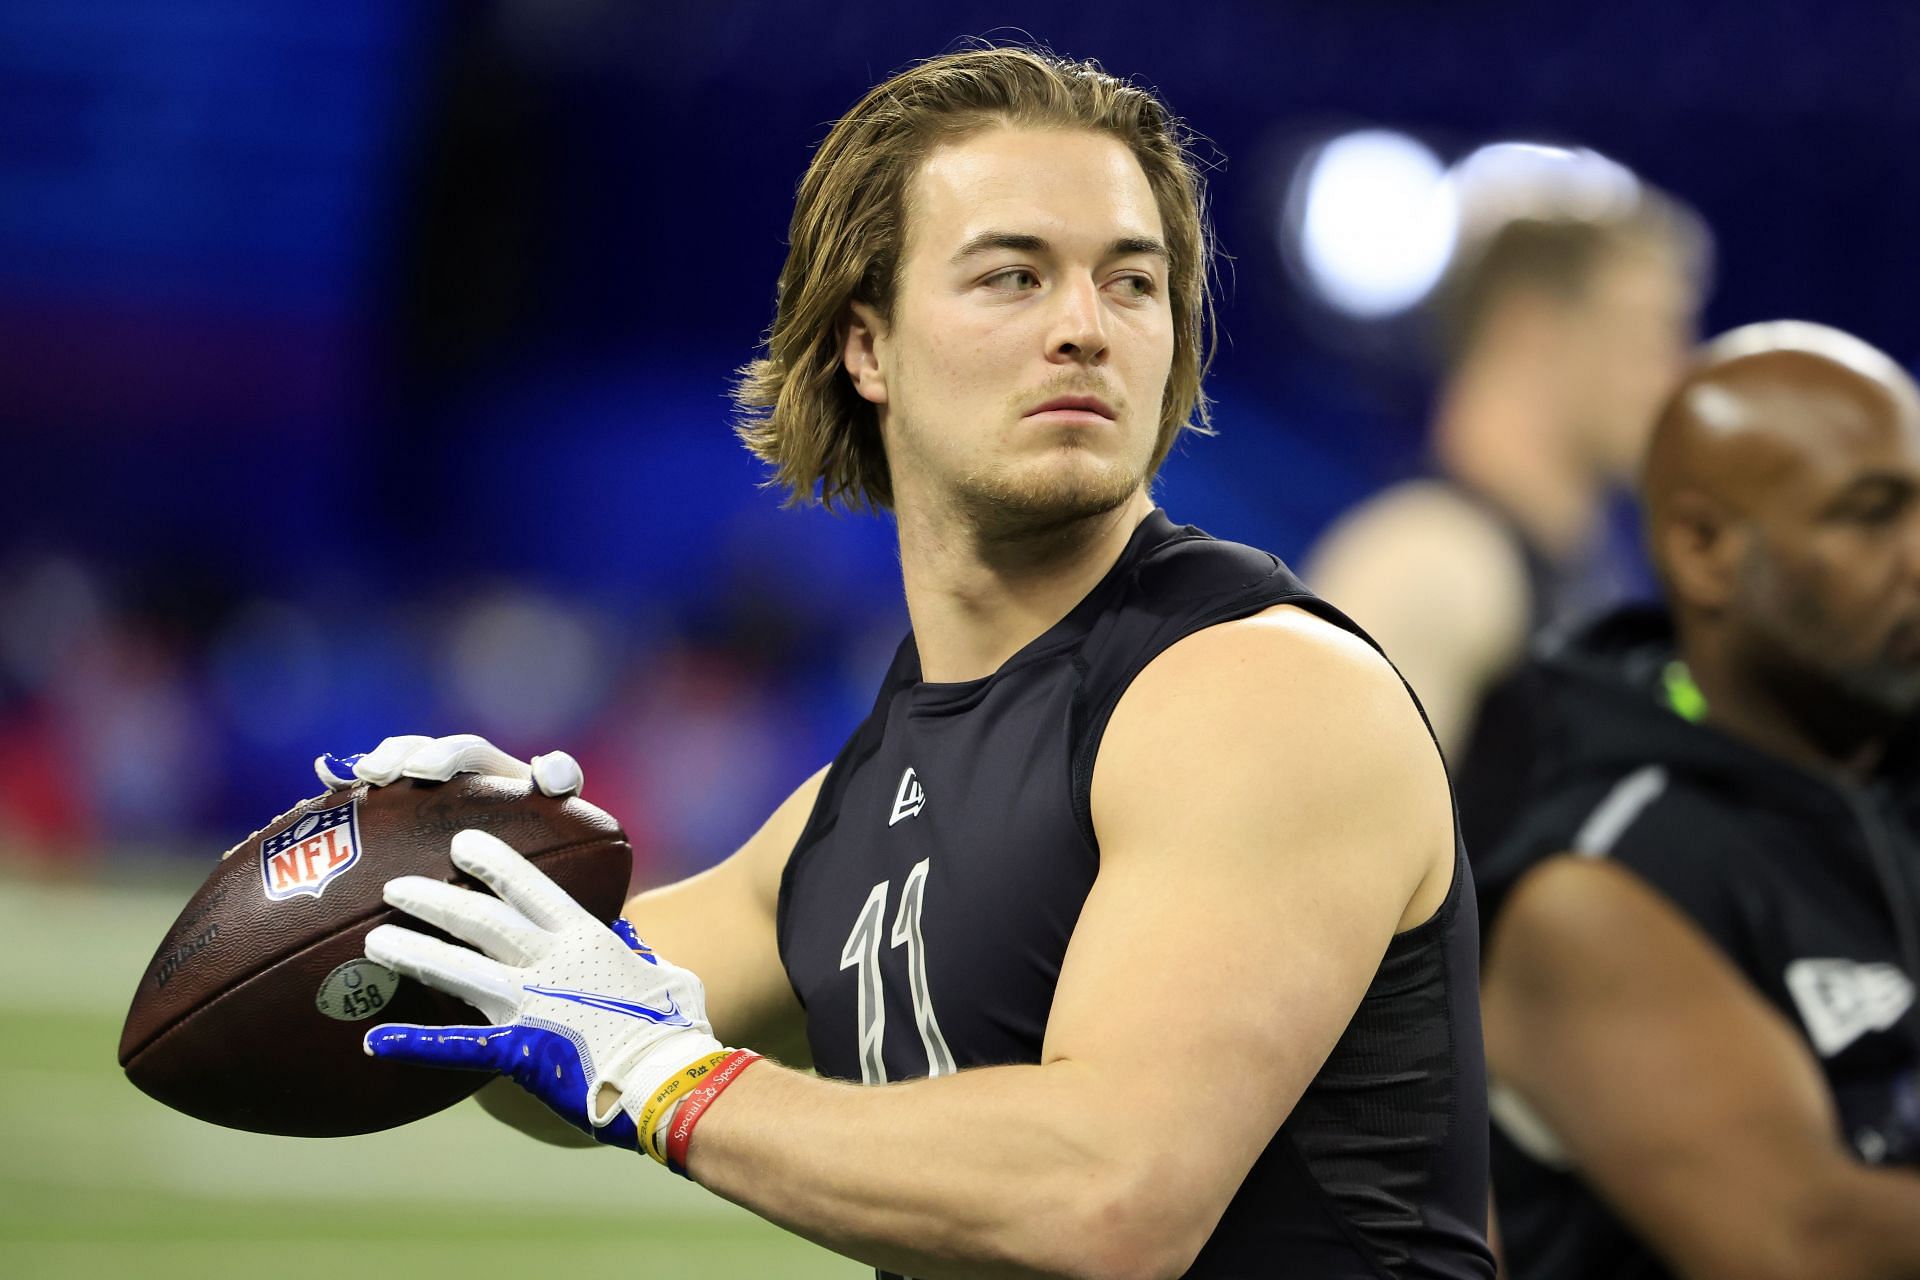 Kenny Pickett works out at the 2022 NFL Combine